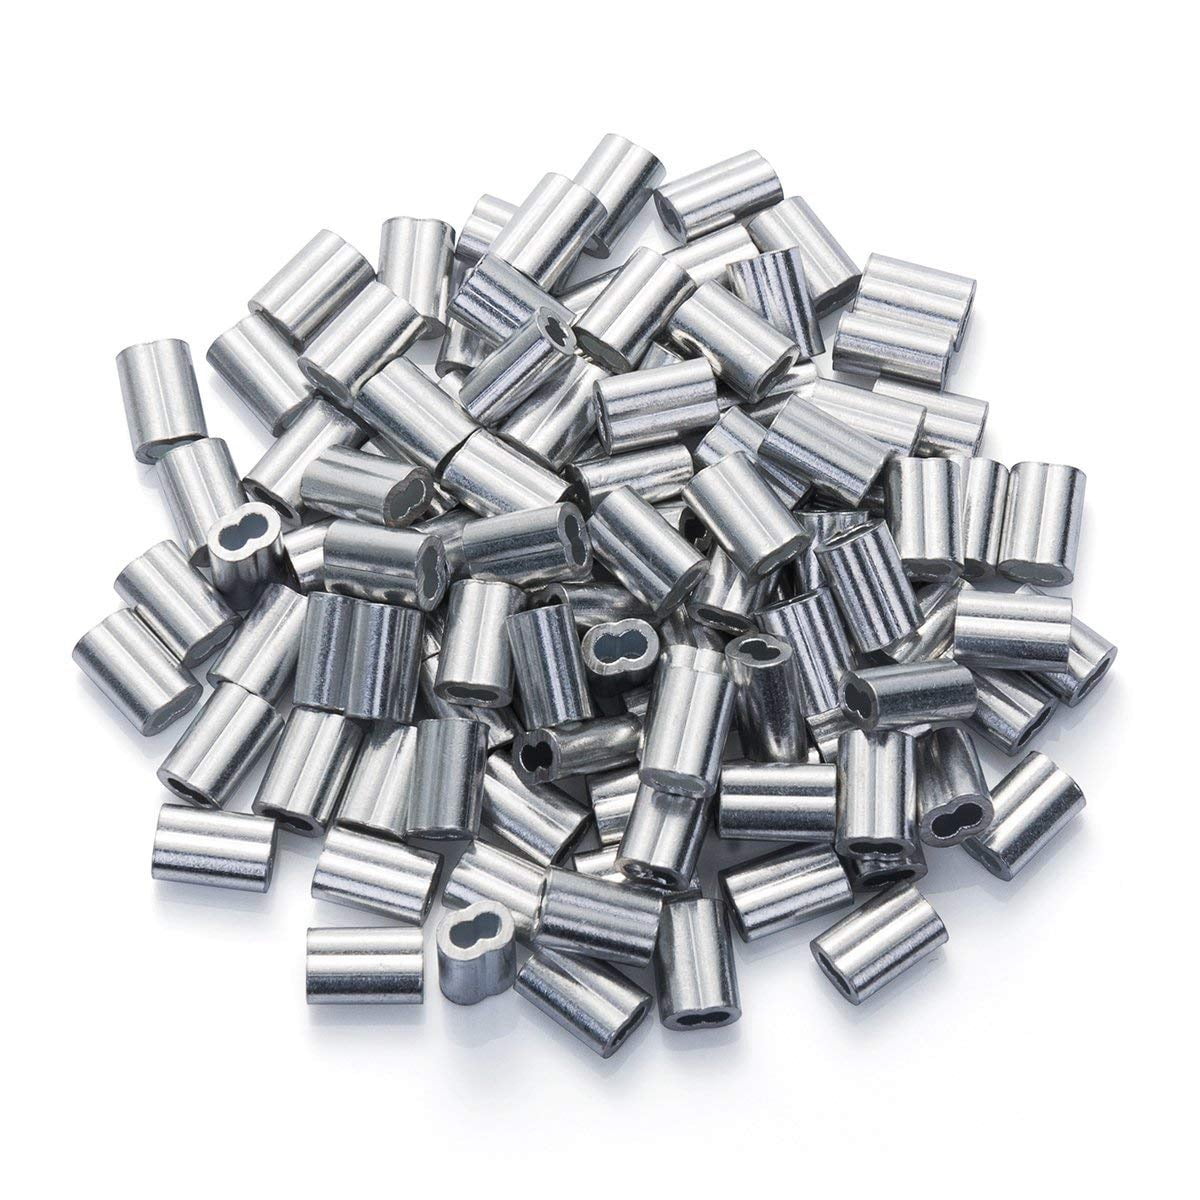 Silver 1.5mm Aluminum Sleeves Clip Fittings with Double Ferrules Aluminium Ferrules for Wire Rope 200 Pcs Aluminum Crimping Loop Sleeve Clips Cable Crimps 